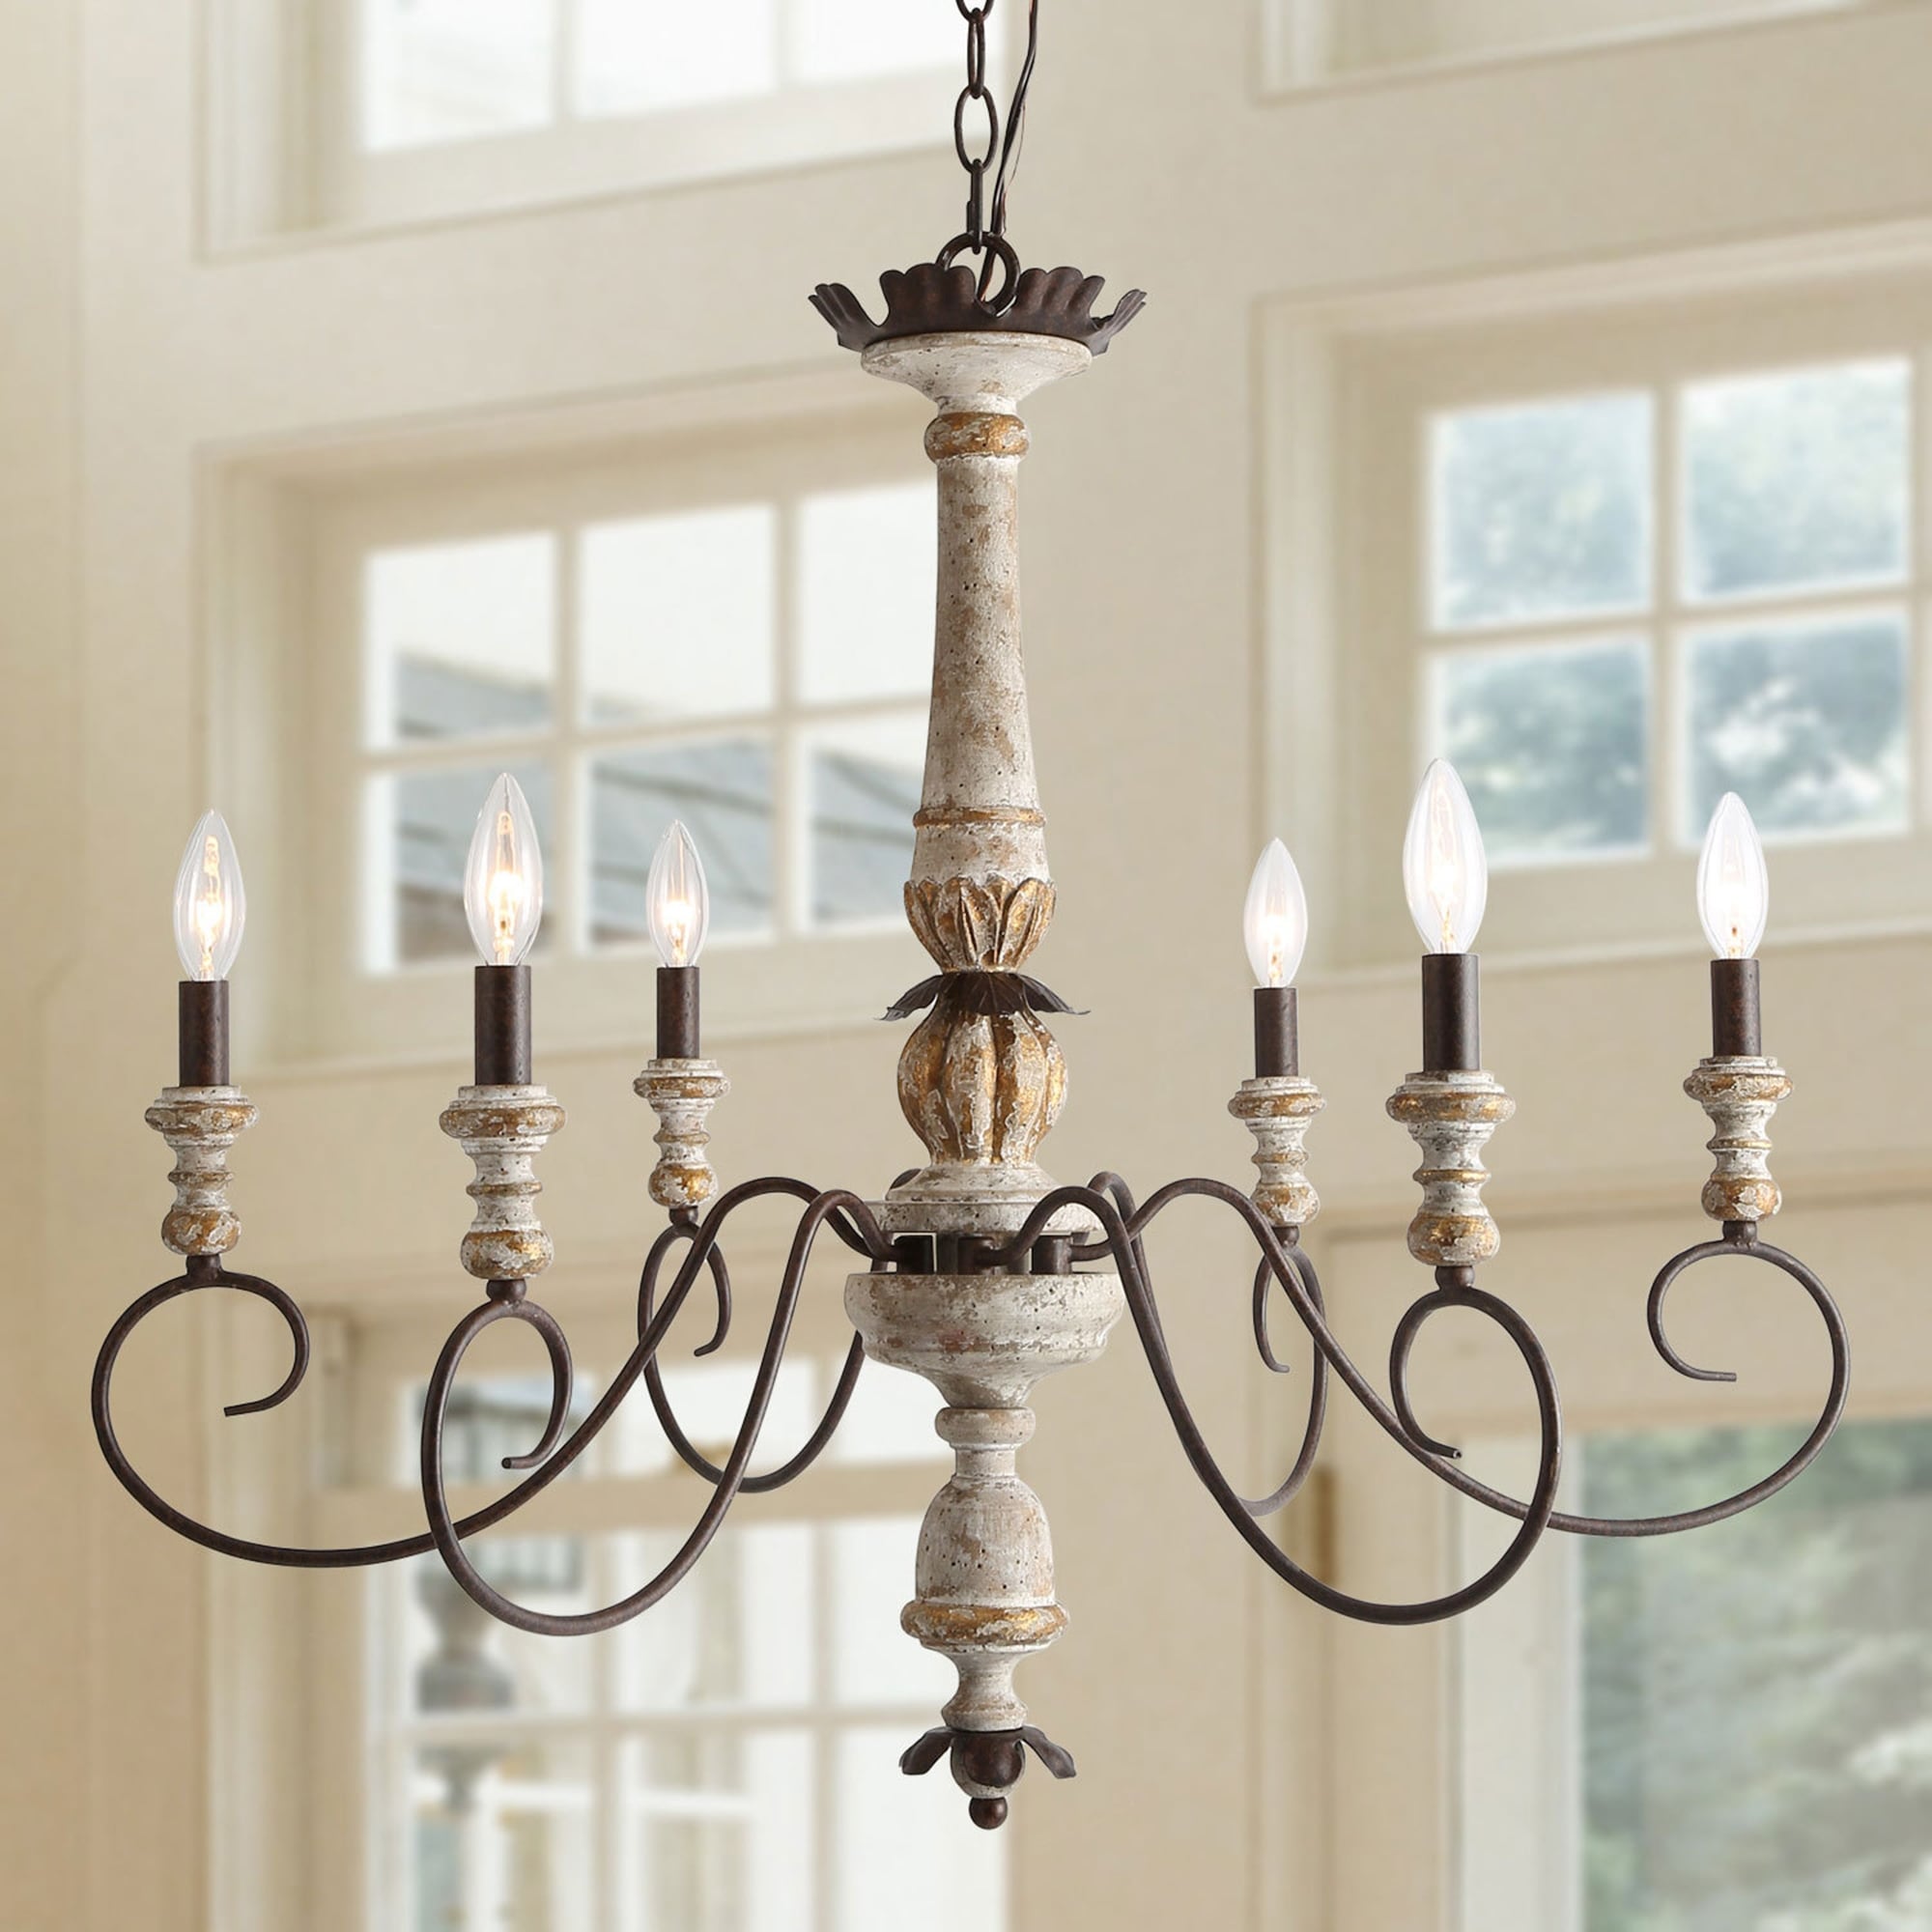 French country style chandeliers for rustic elegance